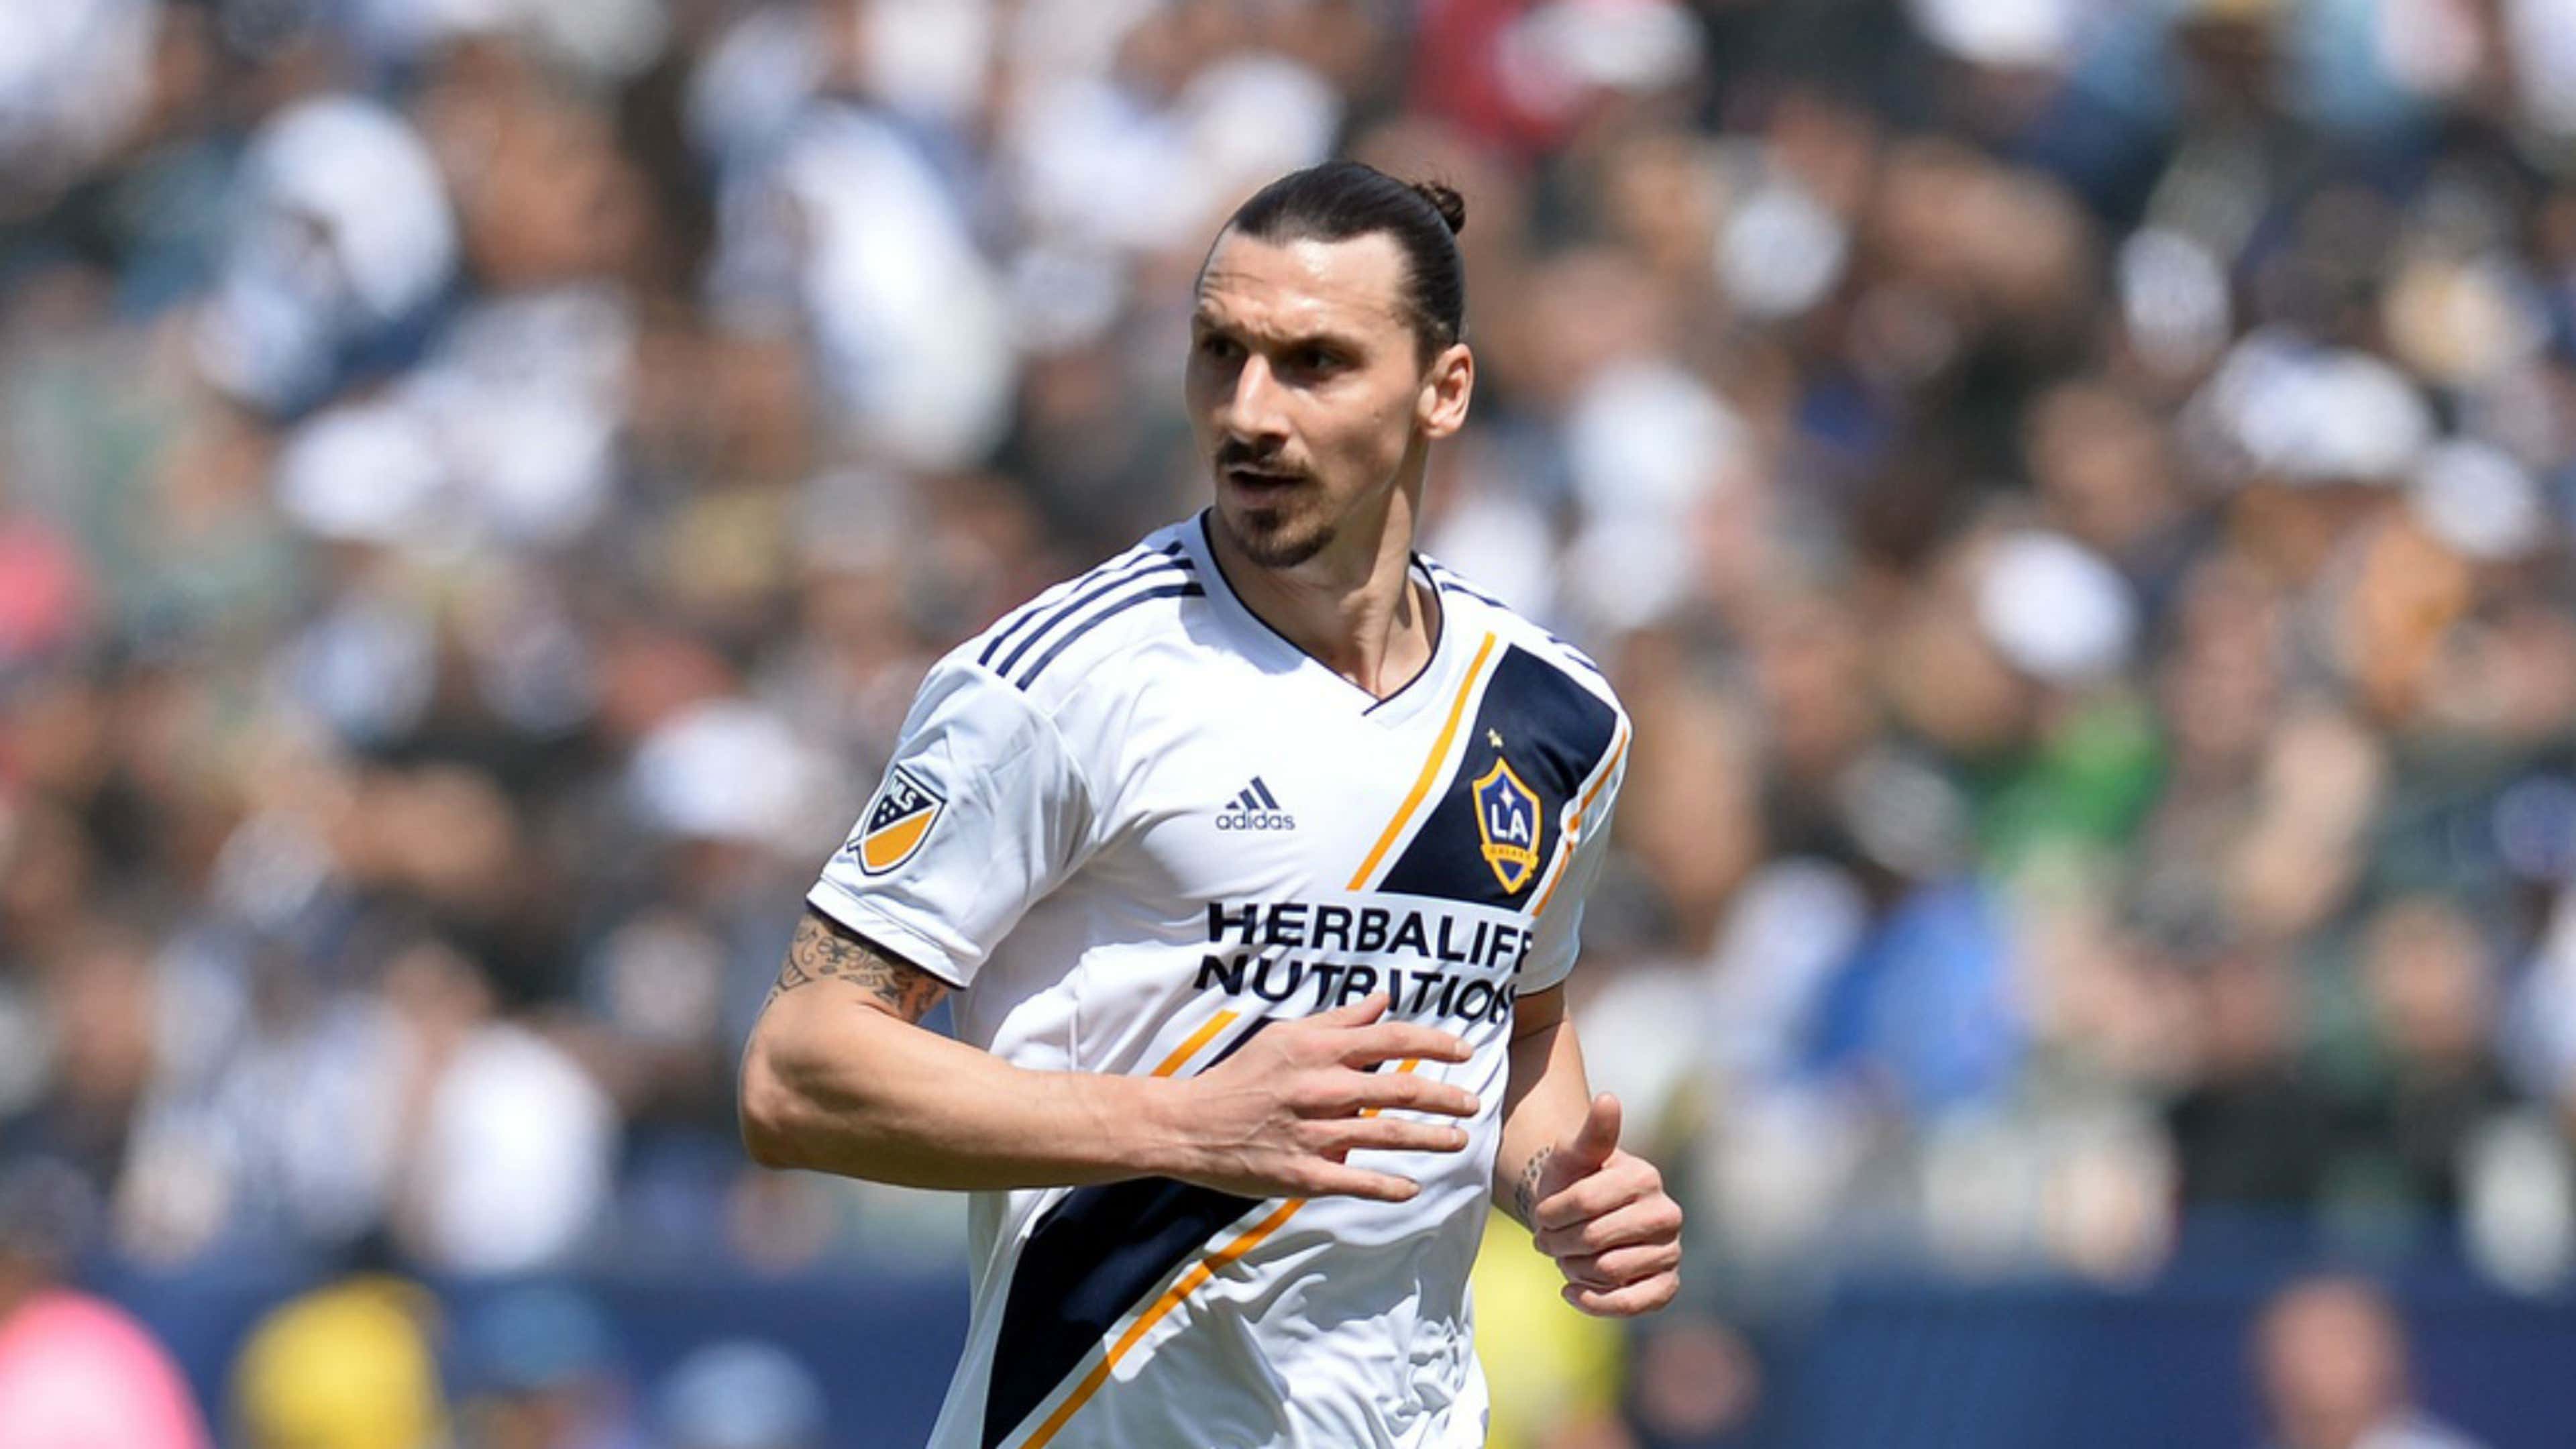 Win over Salt Lake sees LA Galaxy record 6 home wins in 6 - AS USA